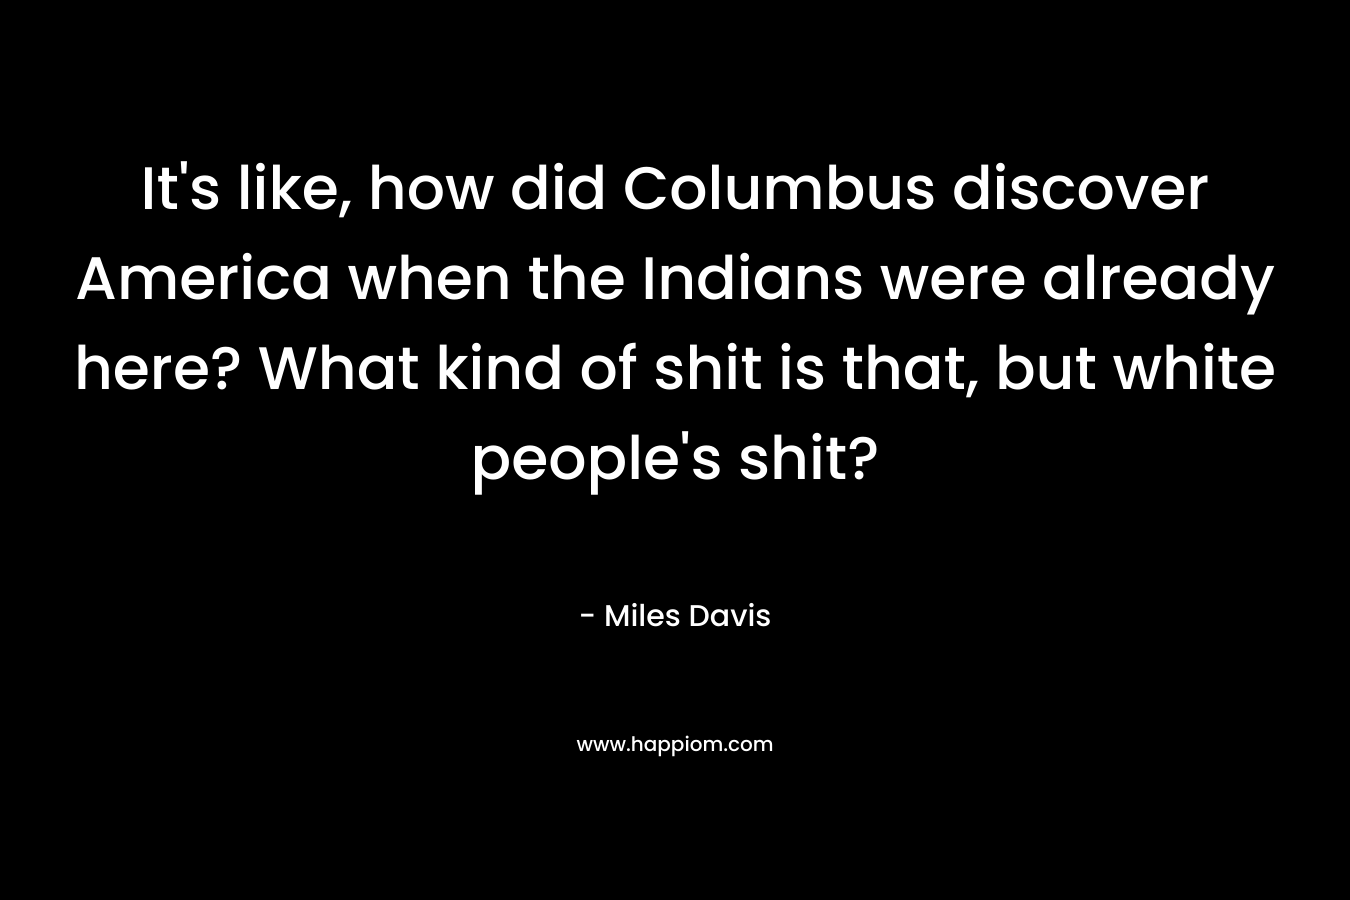 It’s like, how did Columbus discover America when the Indians were already here? What kind of shit is that, but white people’s shit? – Miles Davis